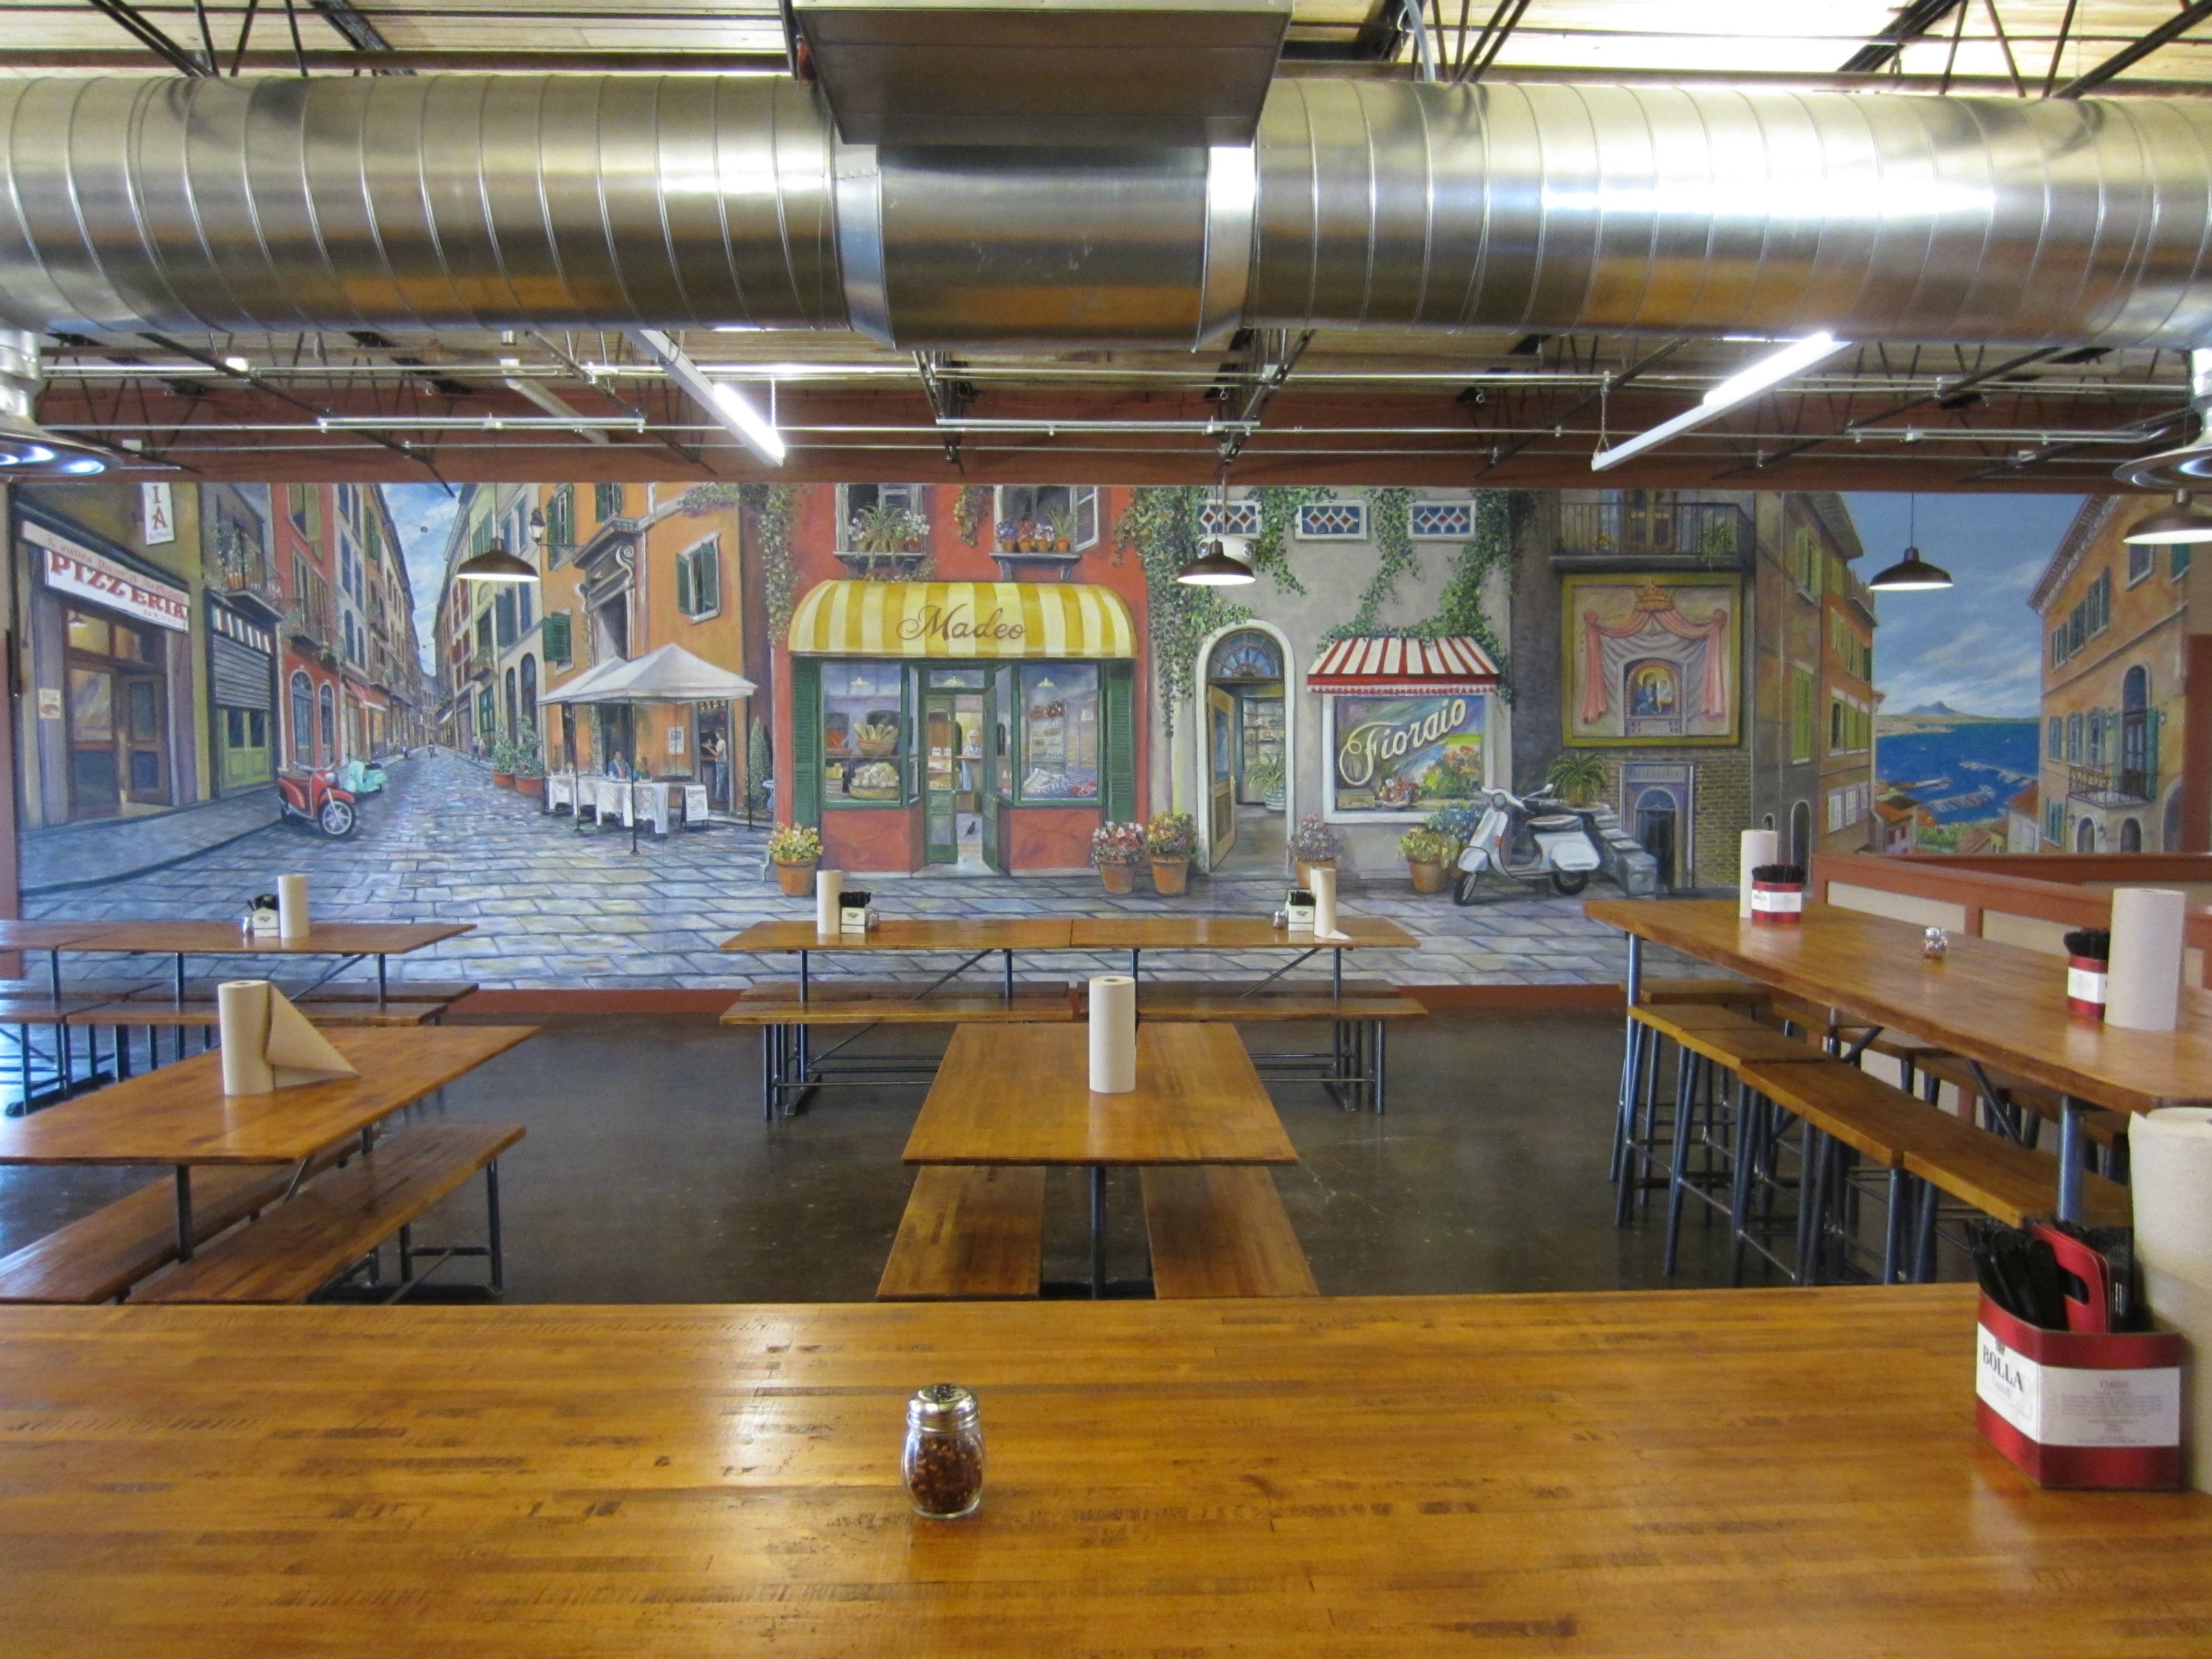 Mural in DeSano's newly expanded space.